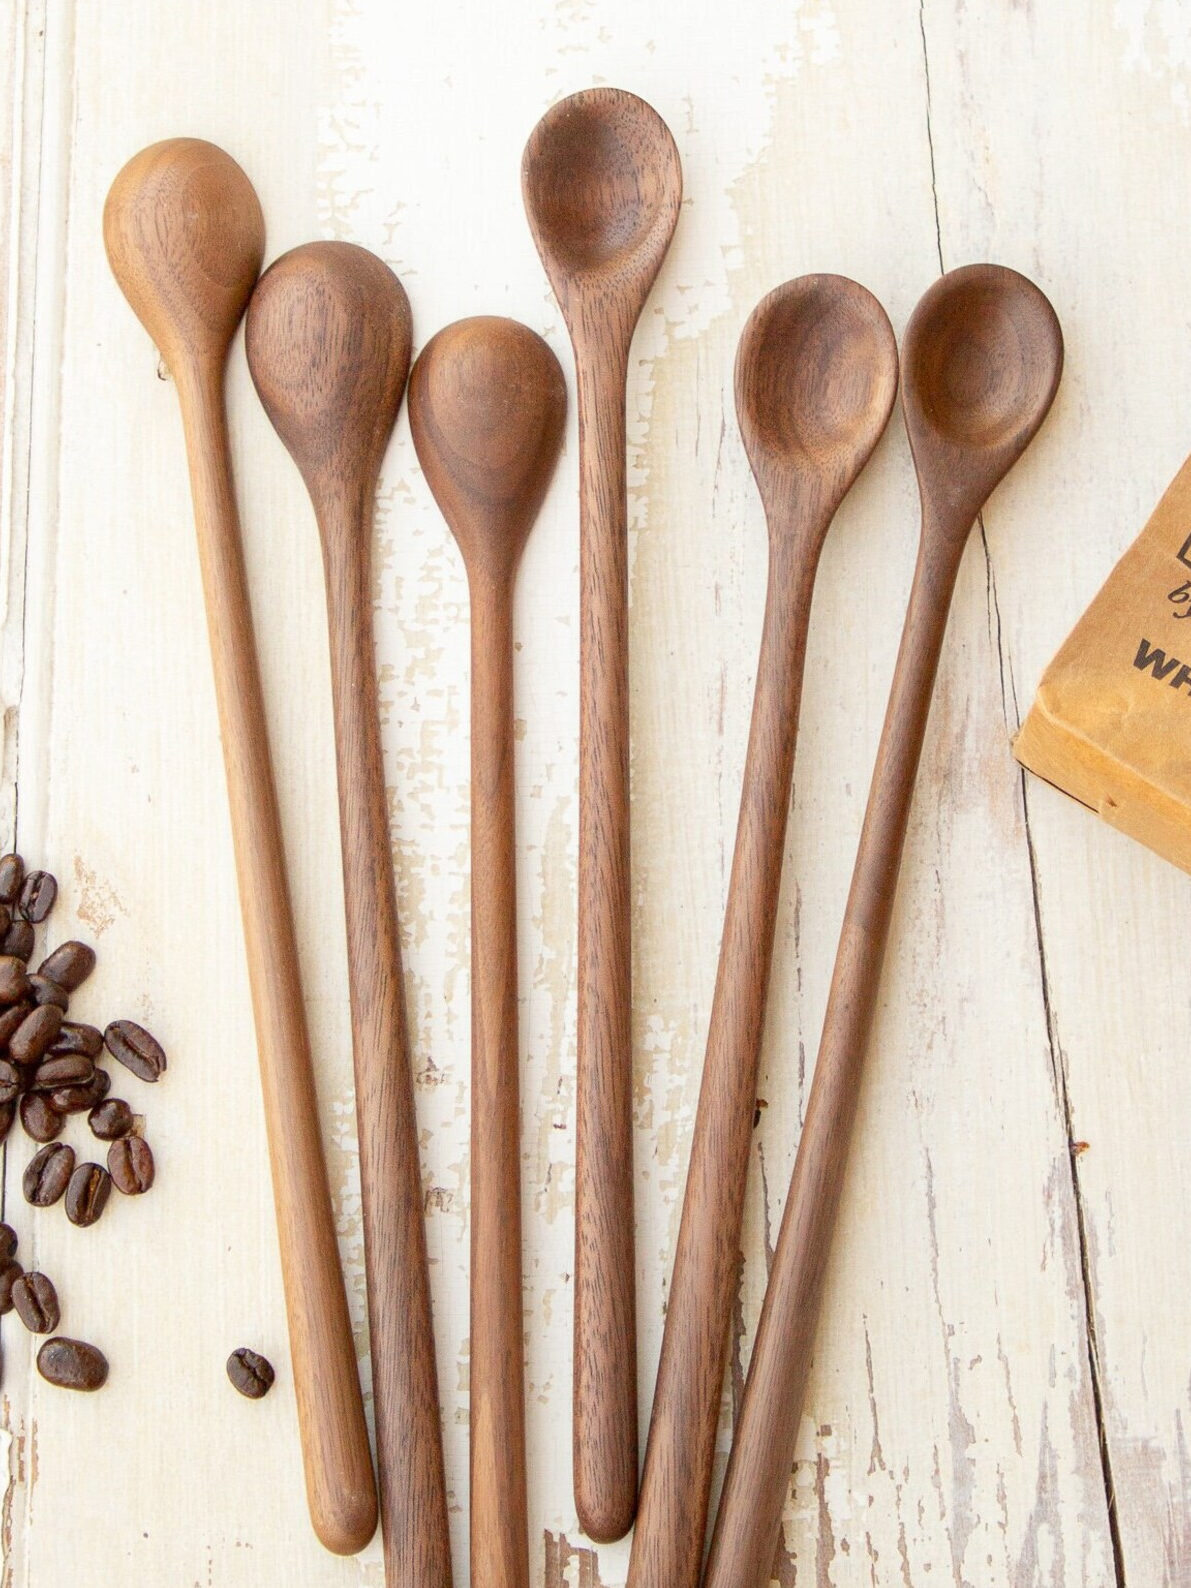 PFAS-Free Wooden Cooking Utensils from Vermont Spoon